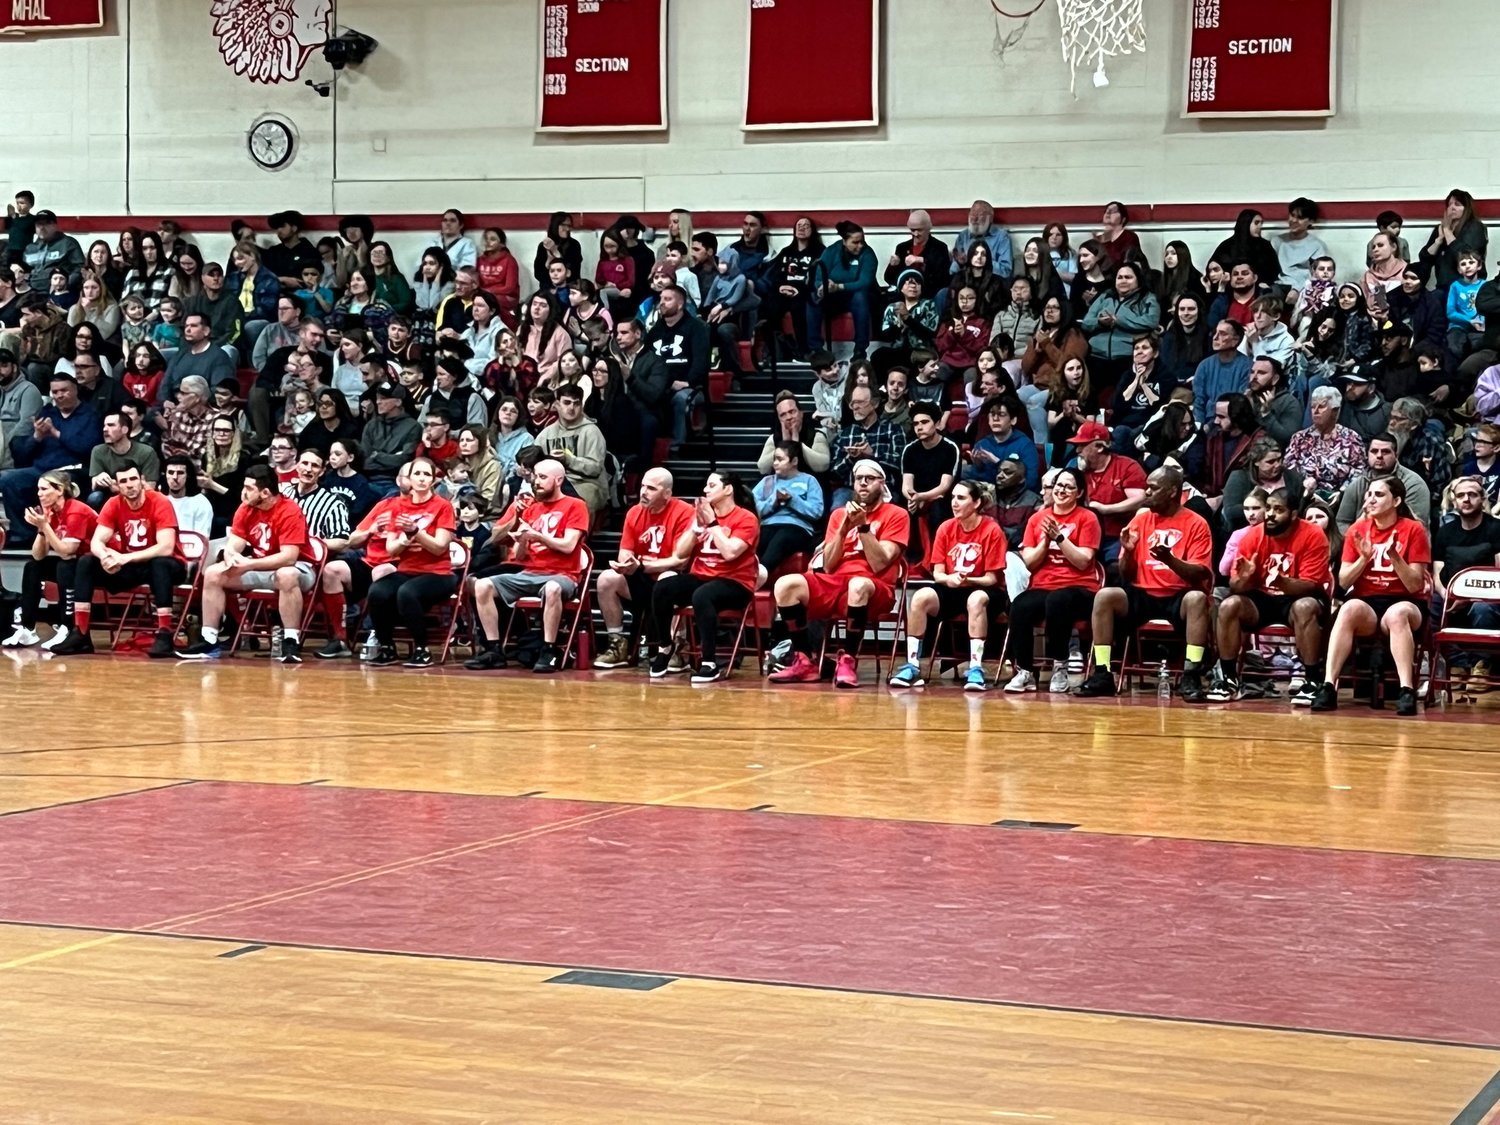 LCSD staff squared off against the Wizards on March 20 in front of a packed gym.